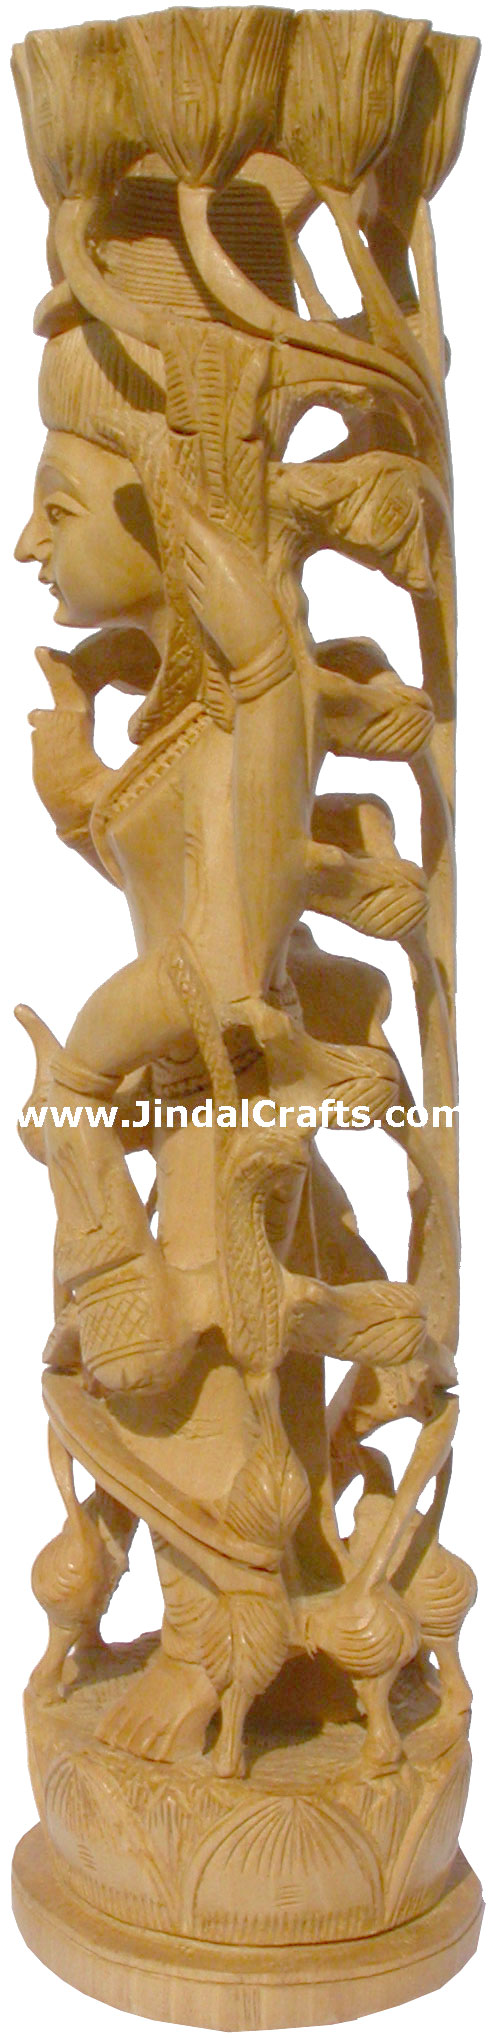 Hand Carved Wood Lord Shiva Figure Statue Idol Sculpture Indian Traditional Arts